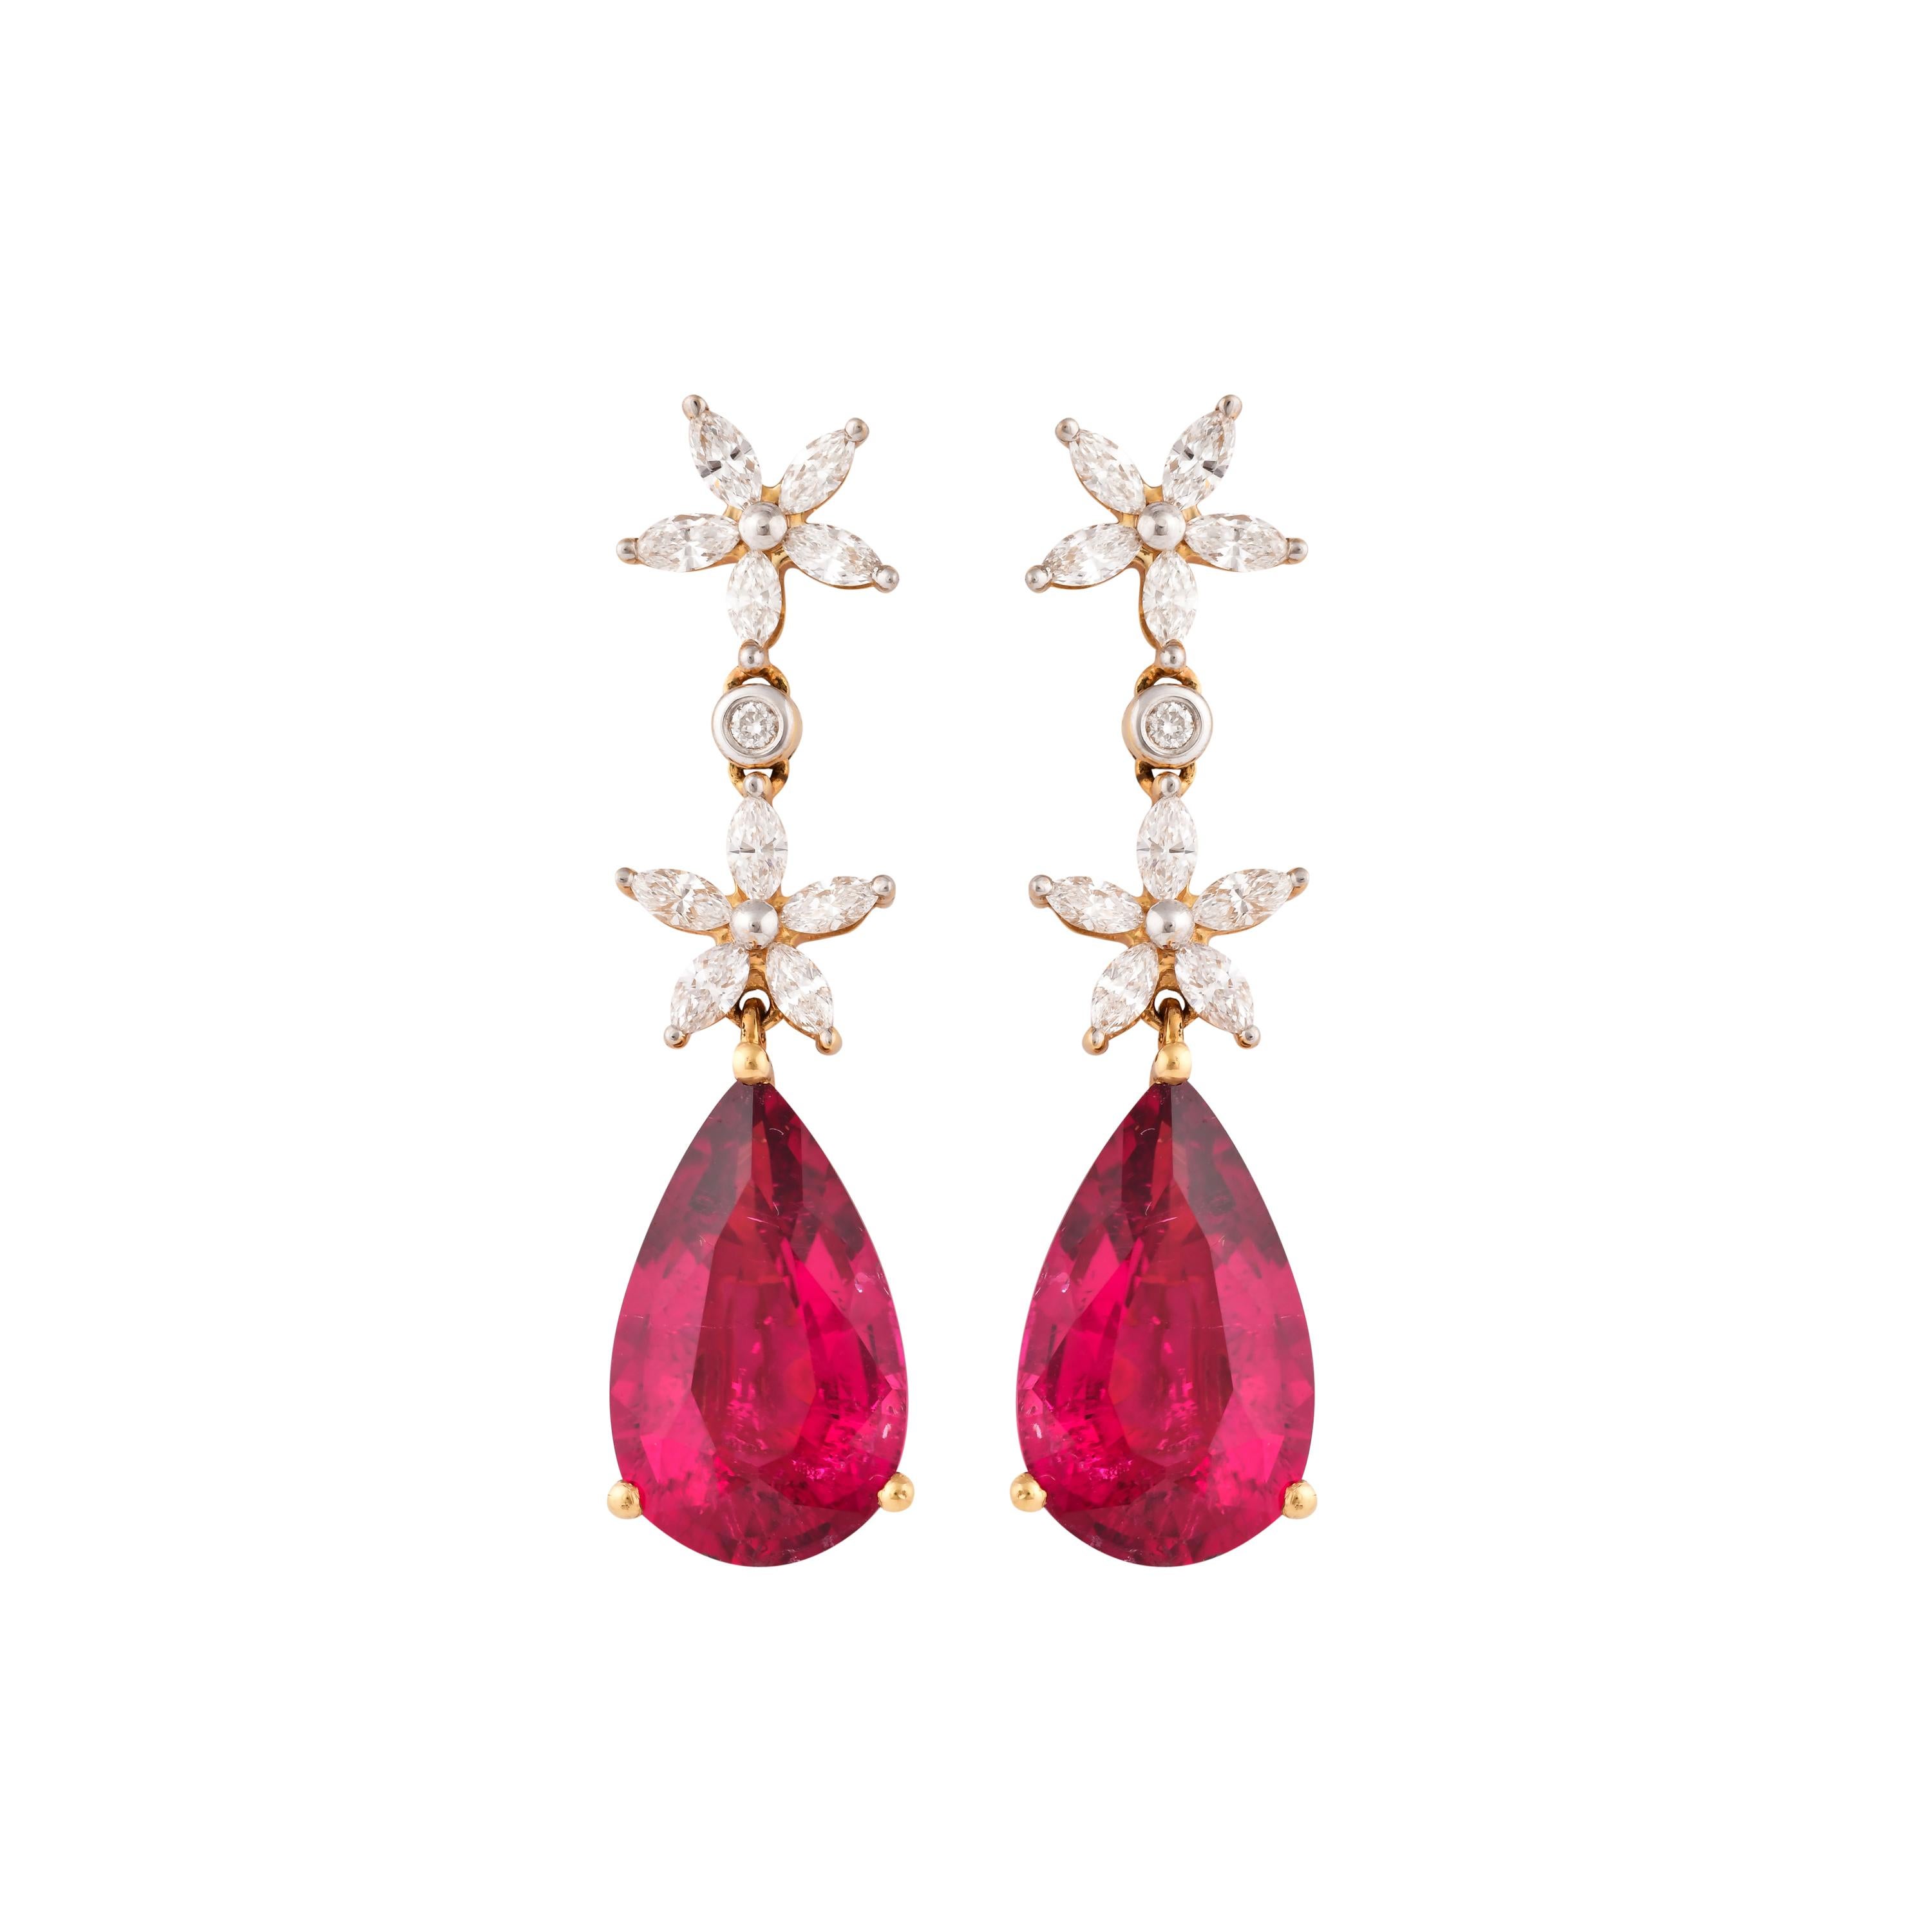 Contemporary 13.84 Carat Rubellite Tourmaline Earring with Diamond in 18 Karat Yellow Gold For Sale